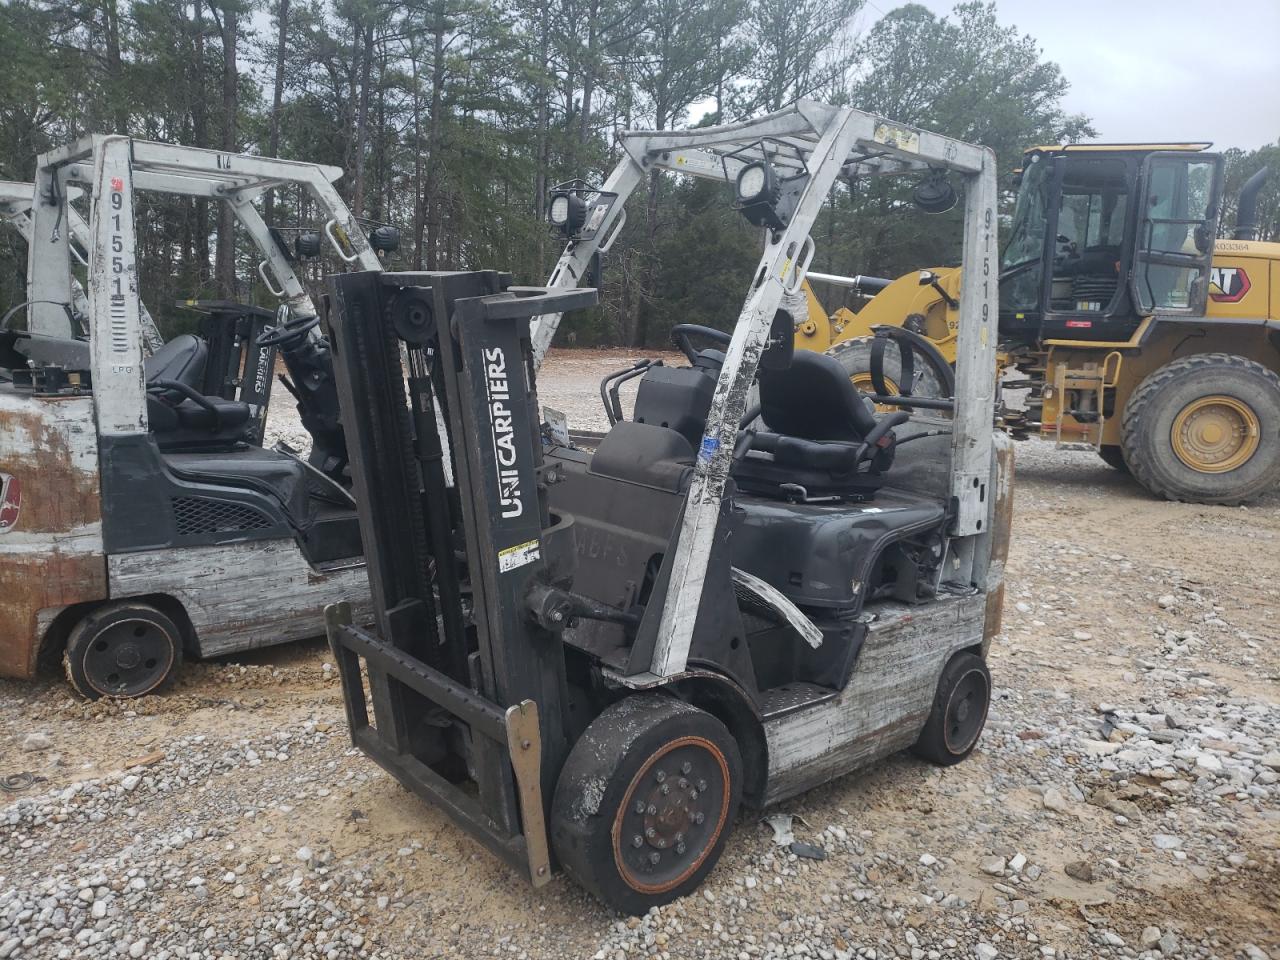 CP1F29W**** Used and Repairable 2014 Nissan Forklift in AL - Hueytown